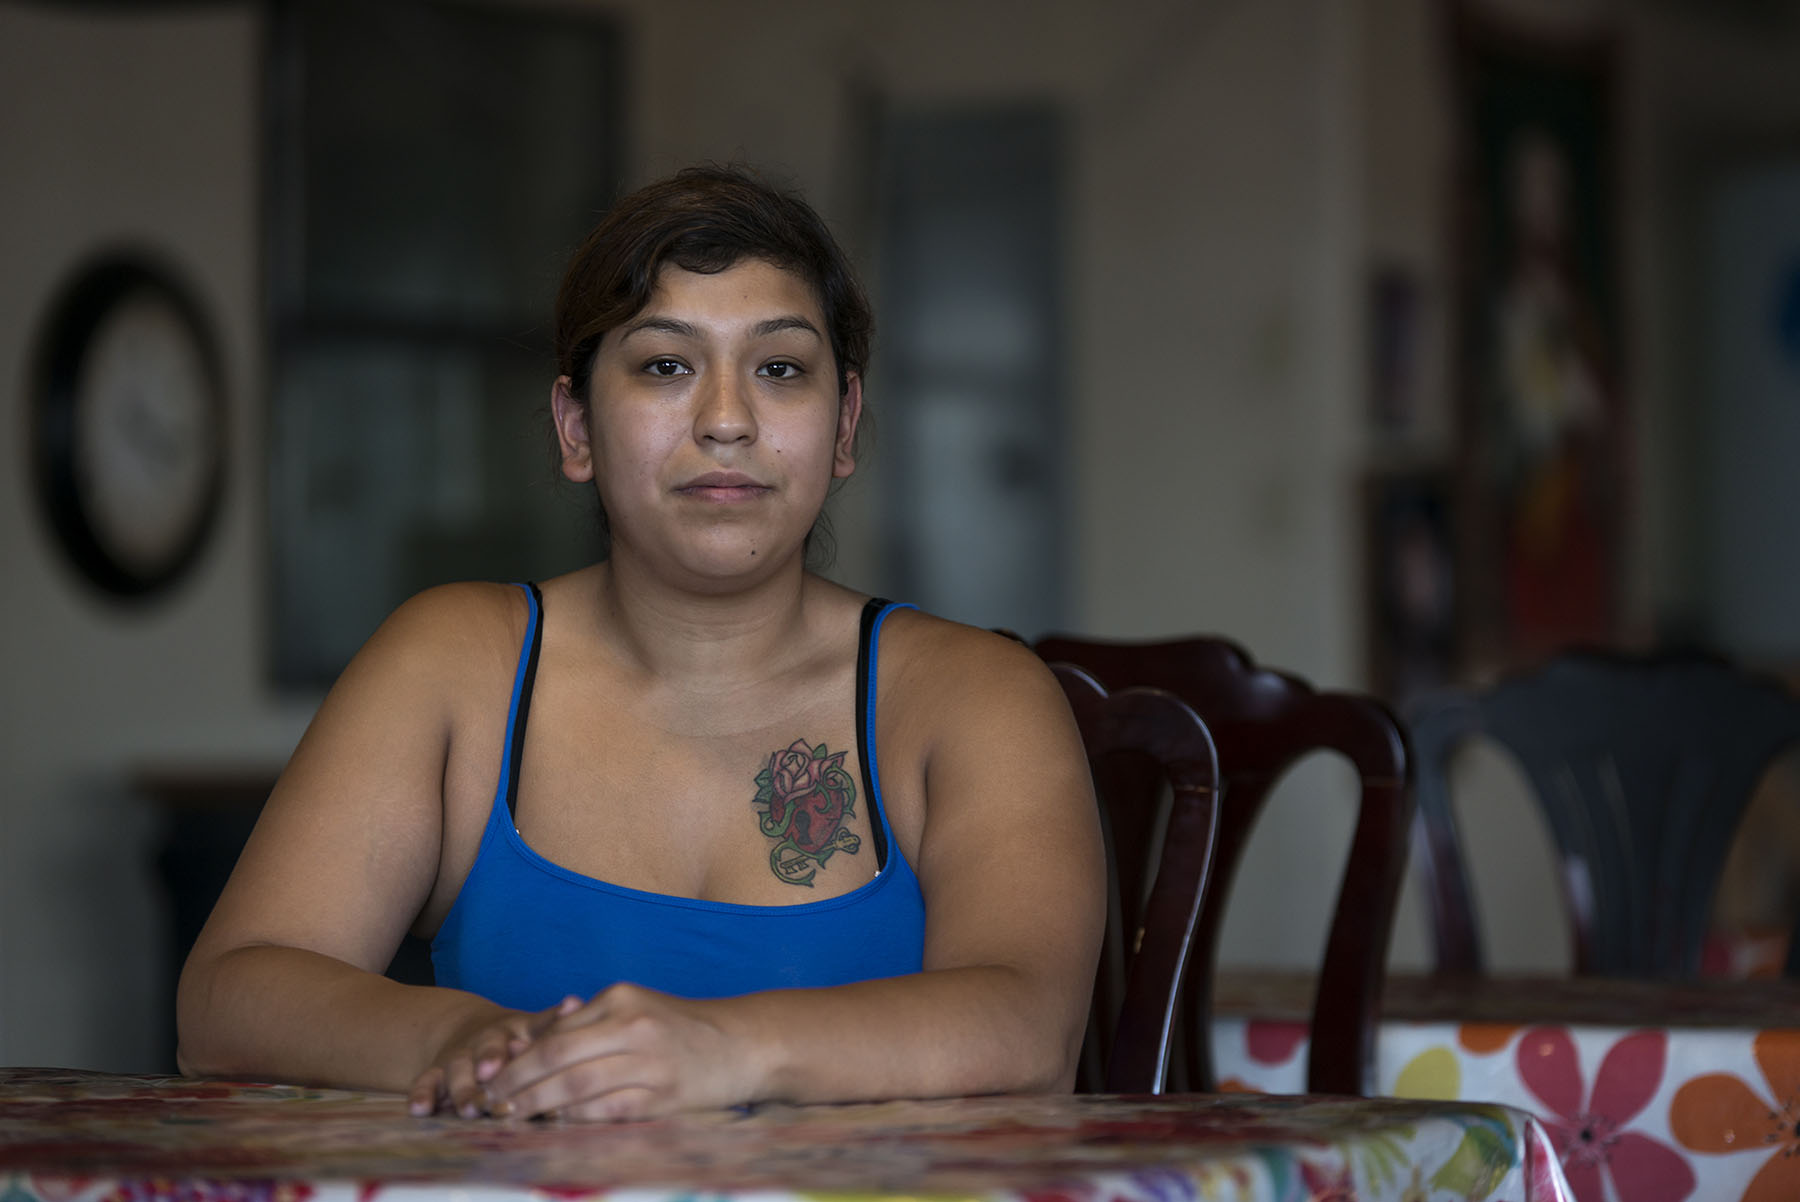 Alejandra Campos, 23, a native of Somerton, Arizona, has never registered to vote. Campos does not believe in the political system. She says politicians only make promises. (Photo by Roman Knertser, audio by Pam Ortega/News21)